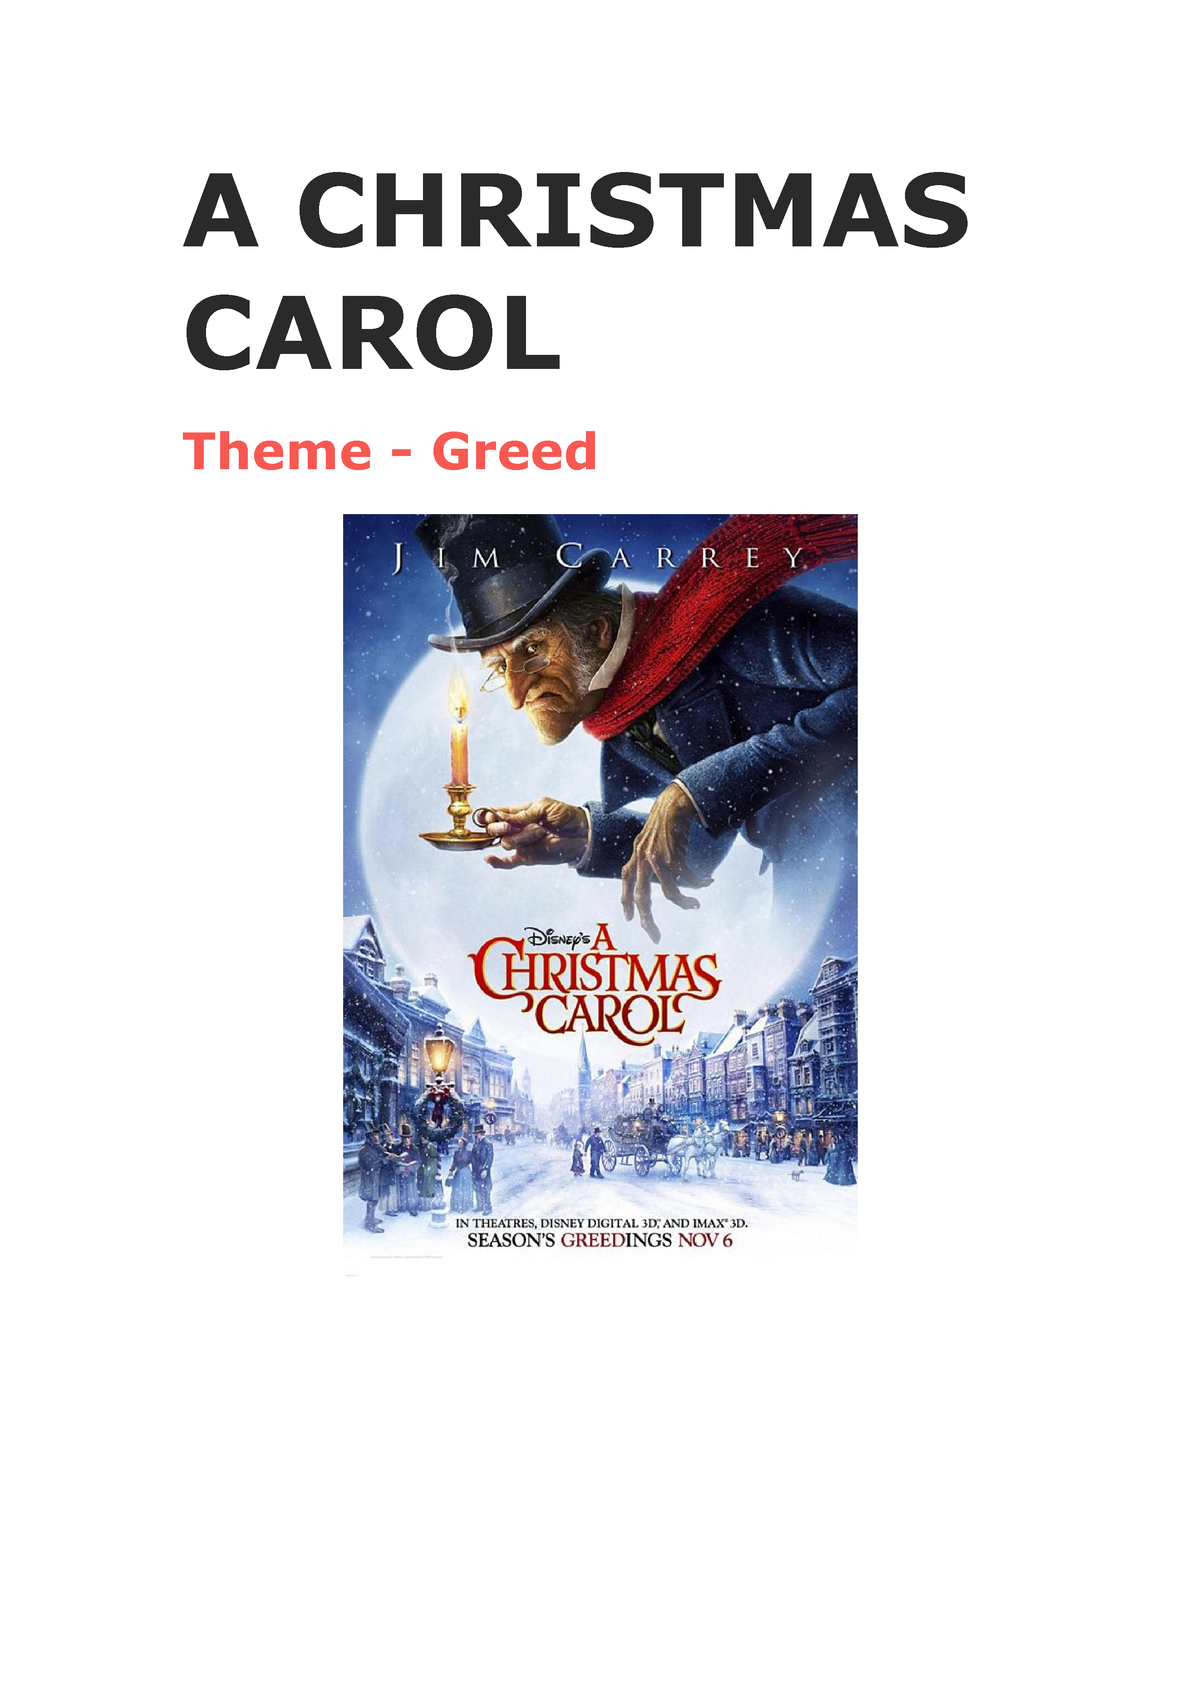 How Is The Theme Of Greed Explored In A Christmas Carol A Christmas Carol Theme Greed How Is